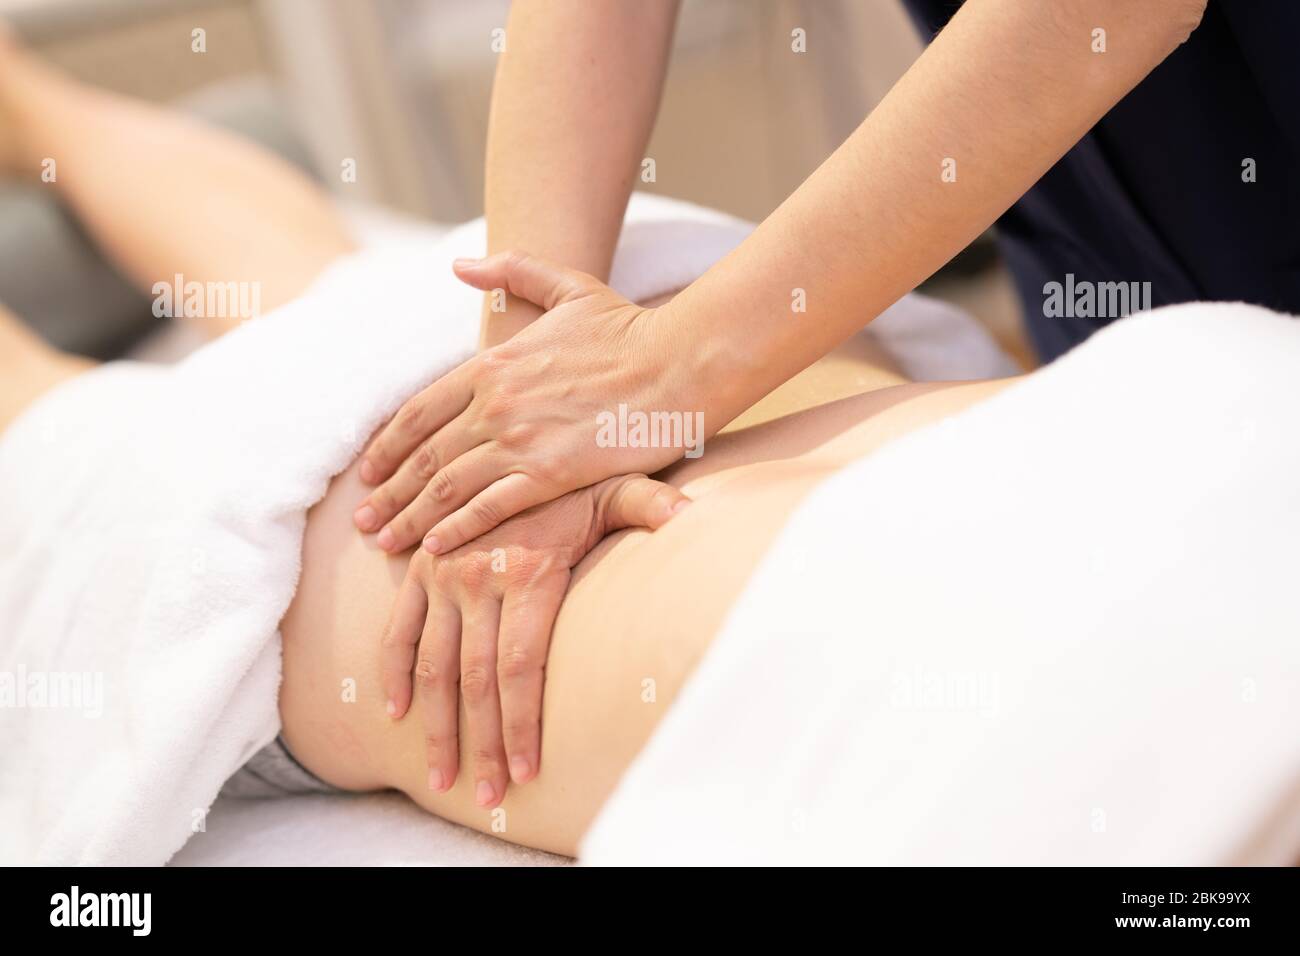 Young woman receiving a back massage in a physiotherapy center Stock Photo